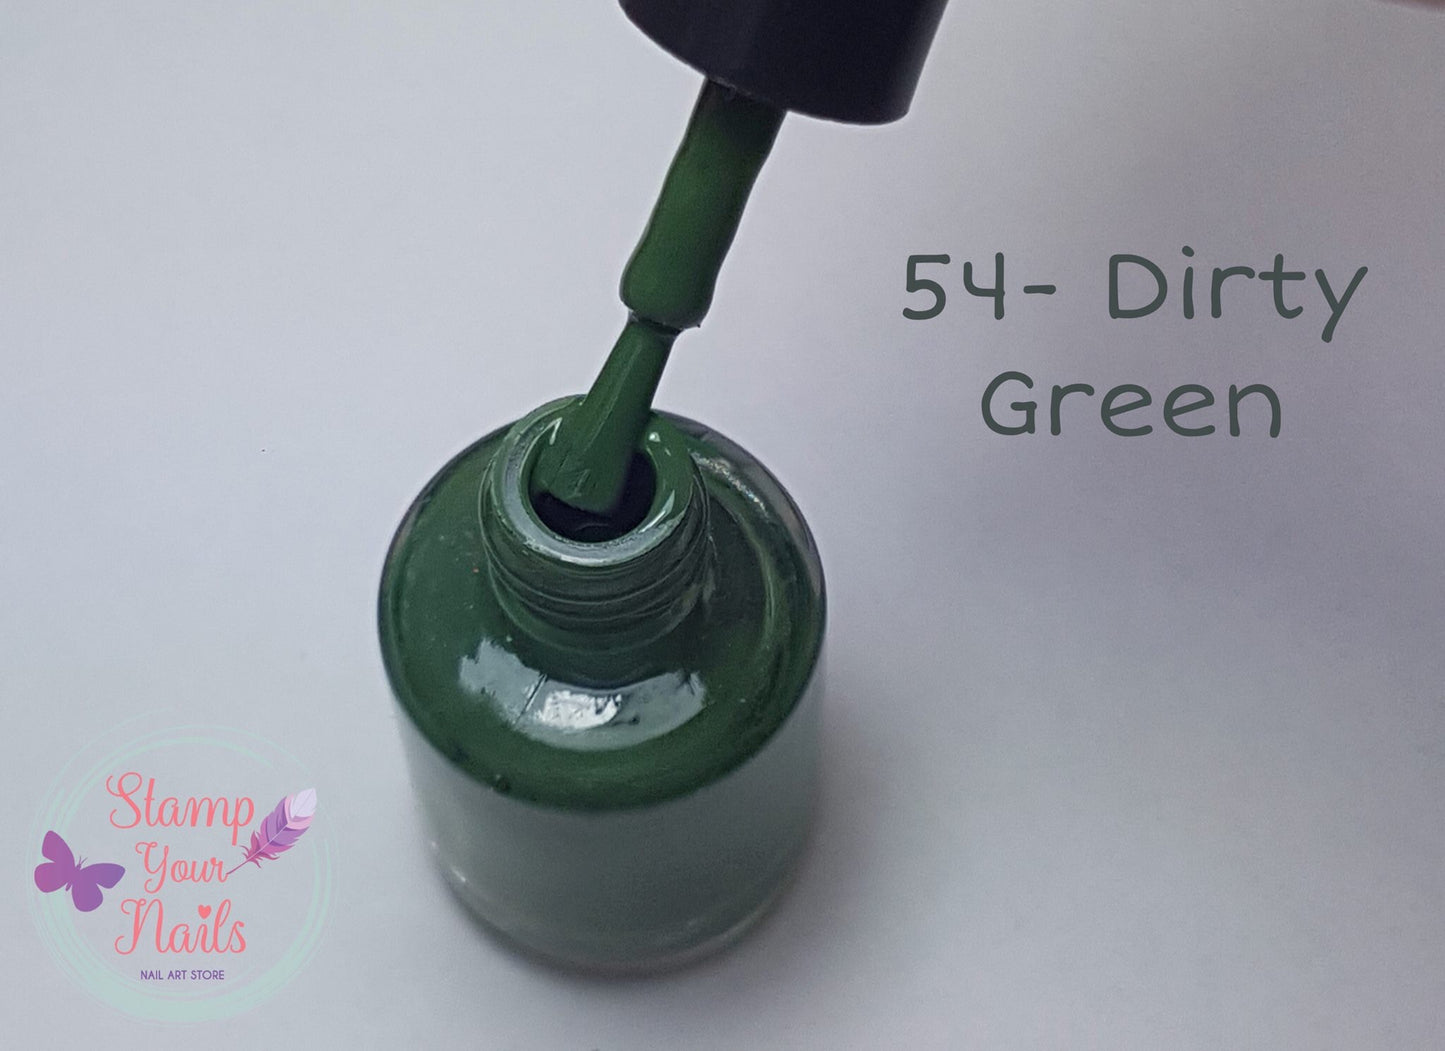 54 Dirty Green - Stamp your nails